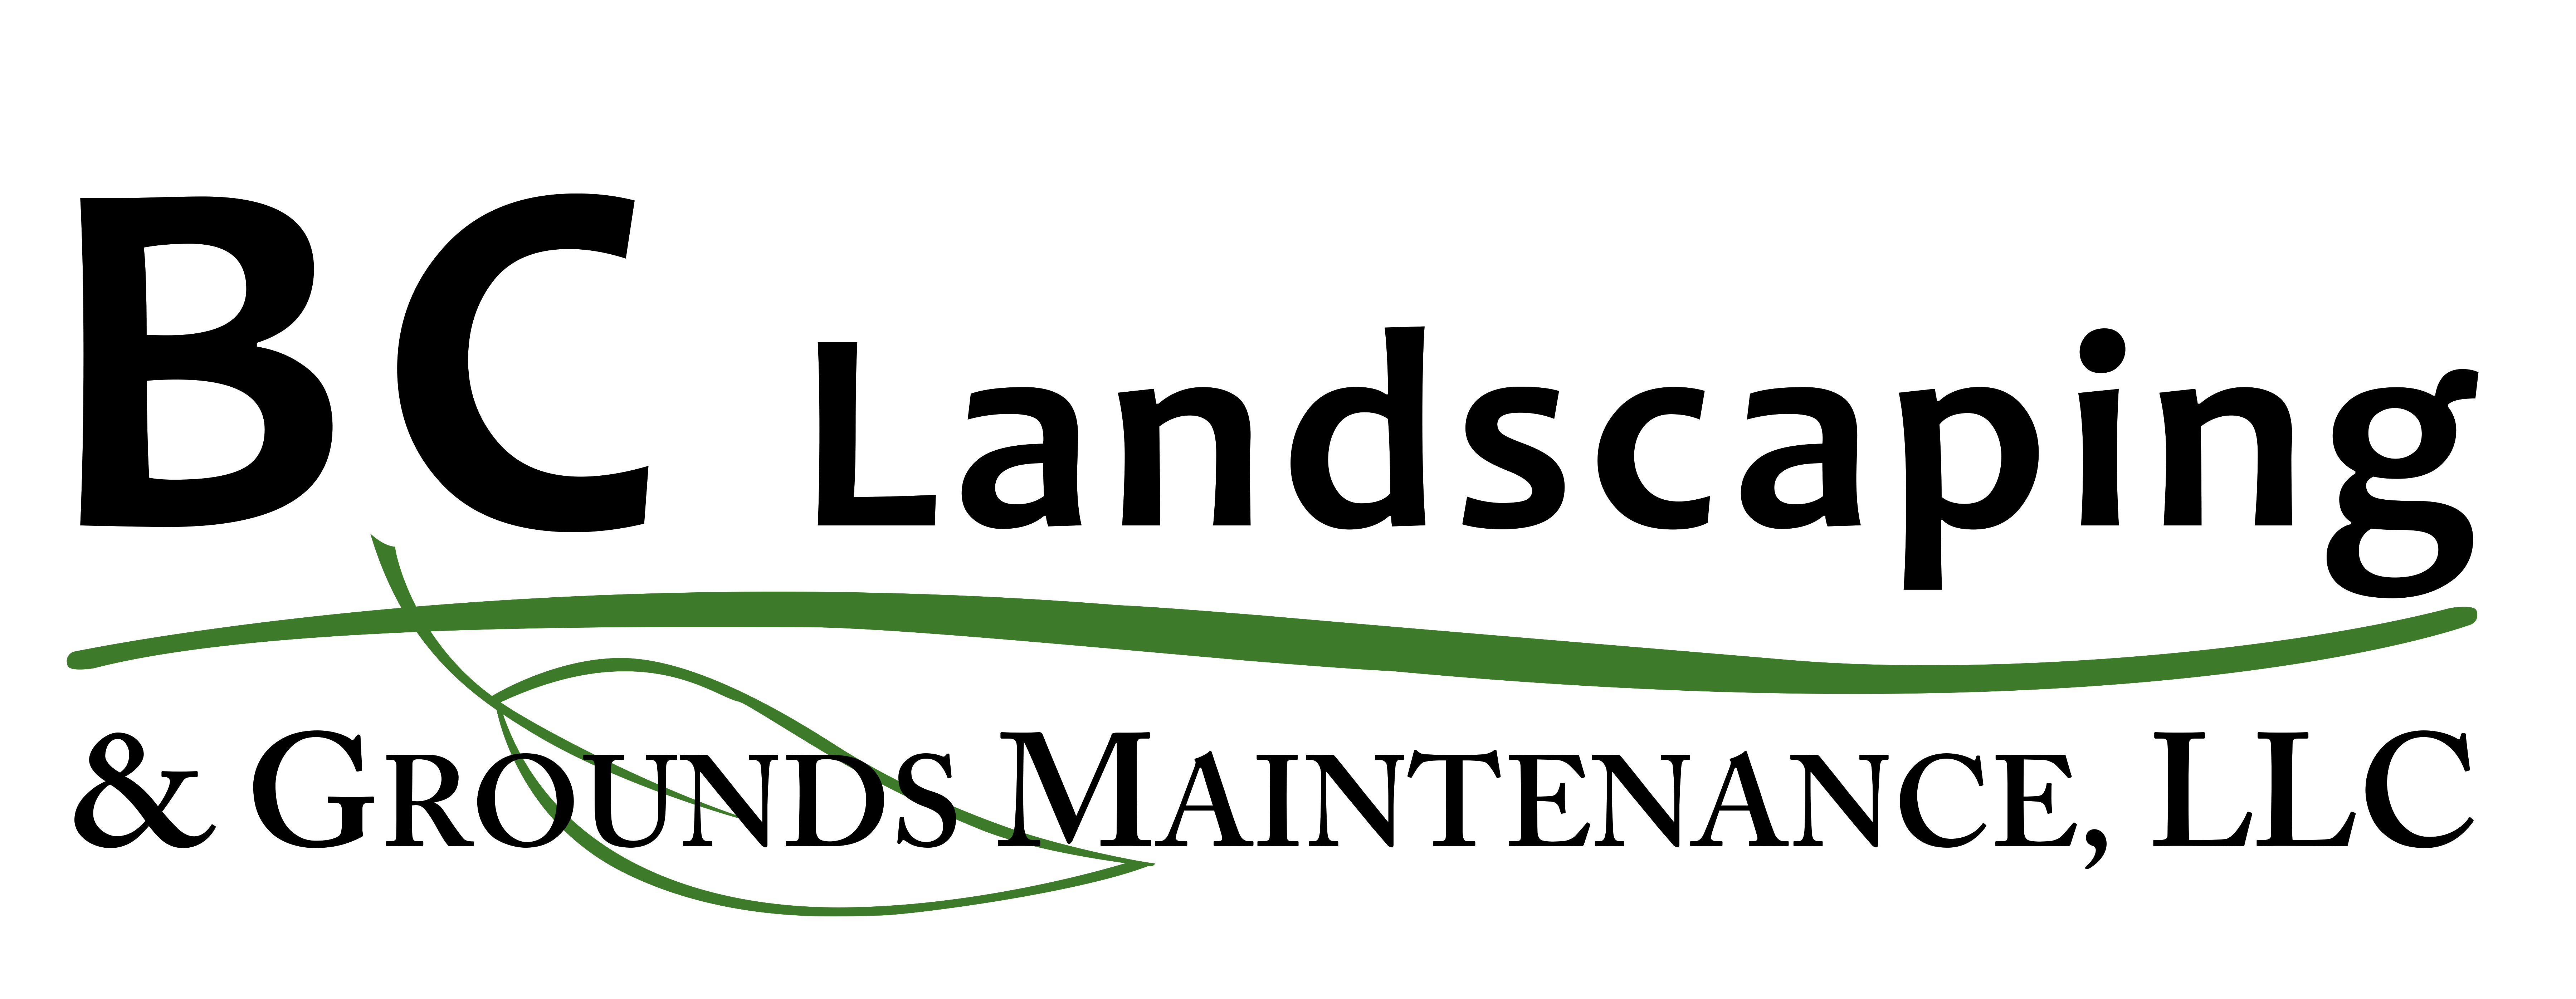 Landscaping Logo PNG Picture